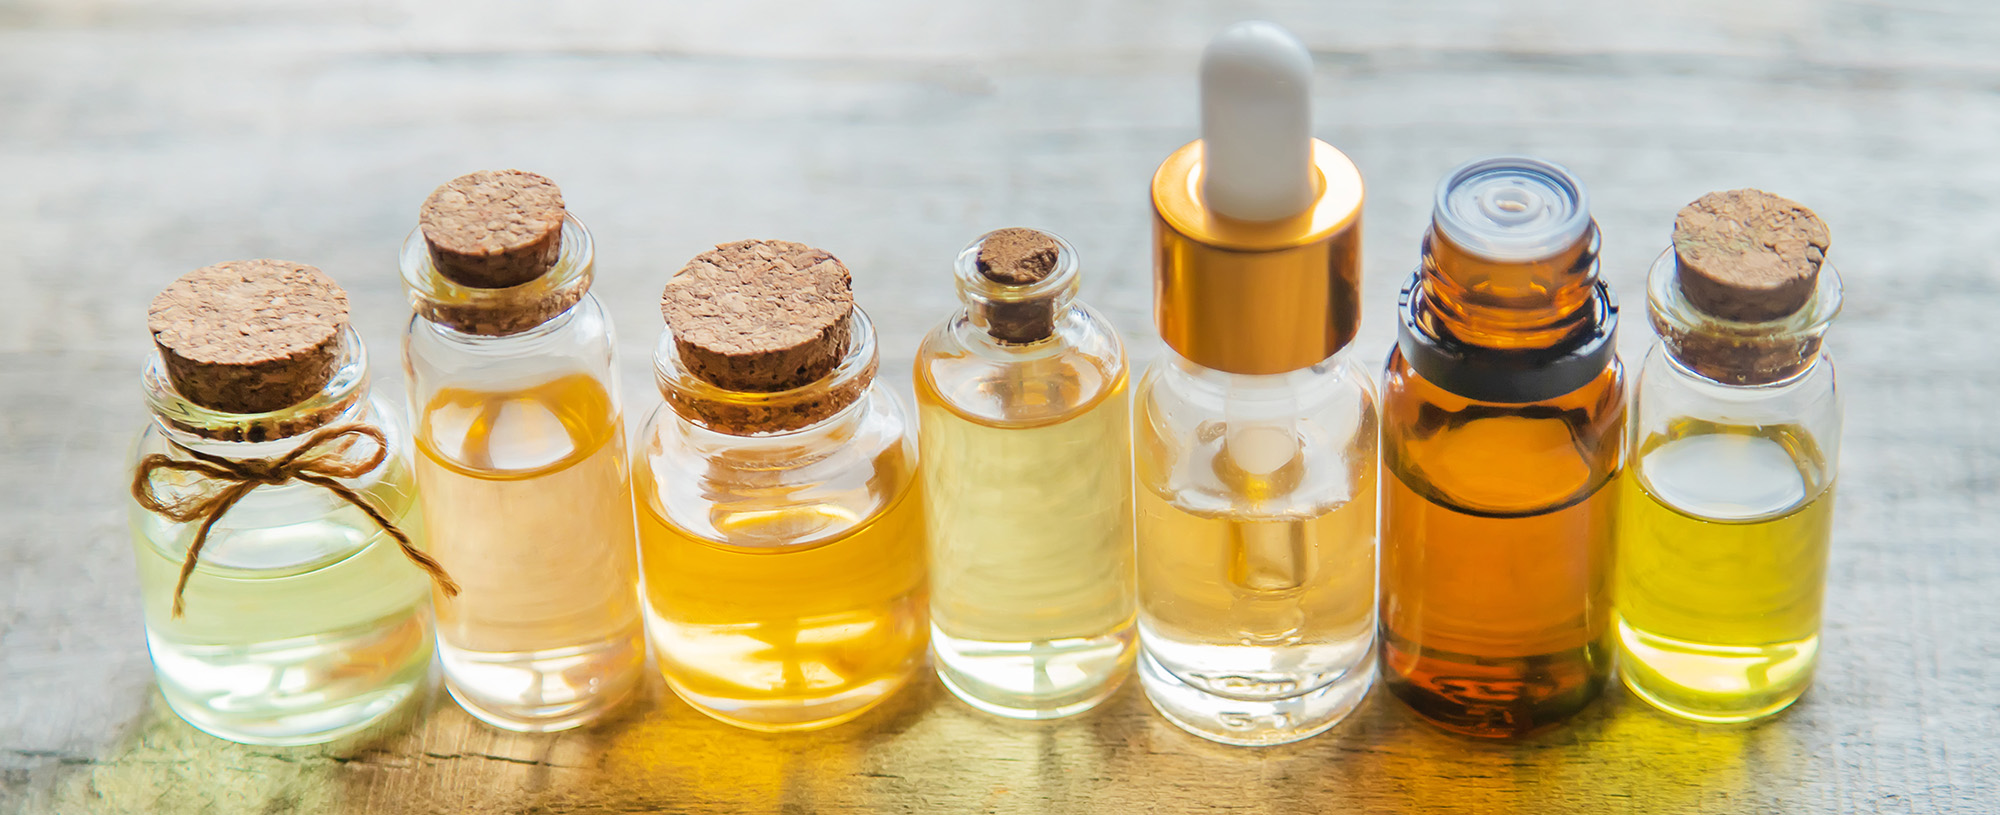 Which plant’s essential oil can be extracted by the distillation process?